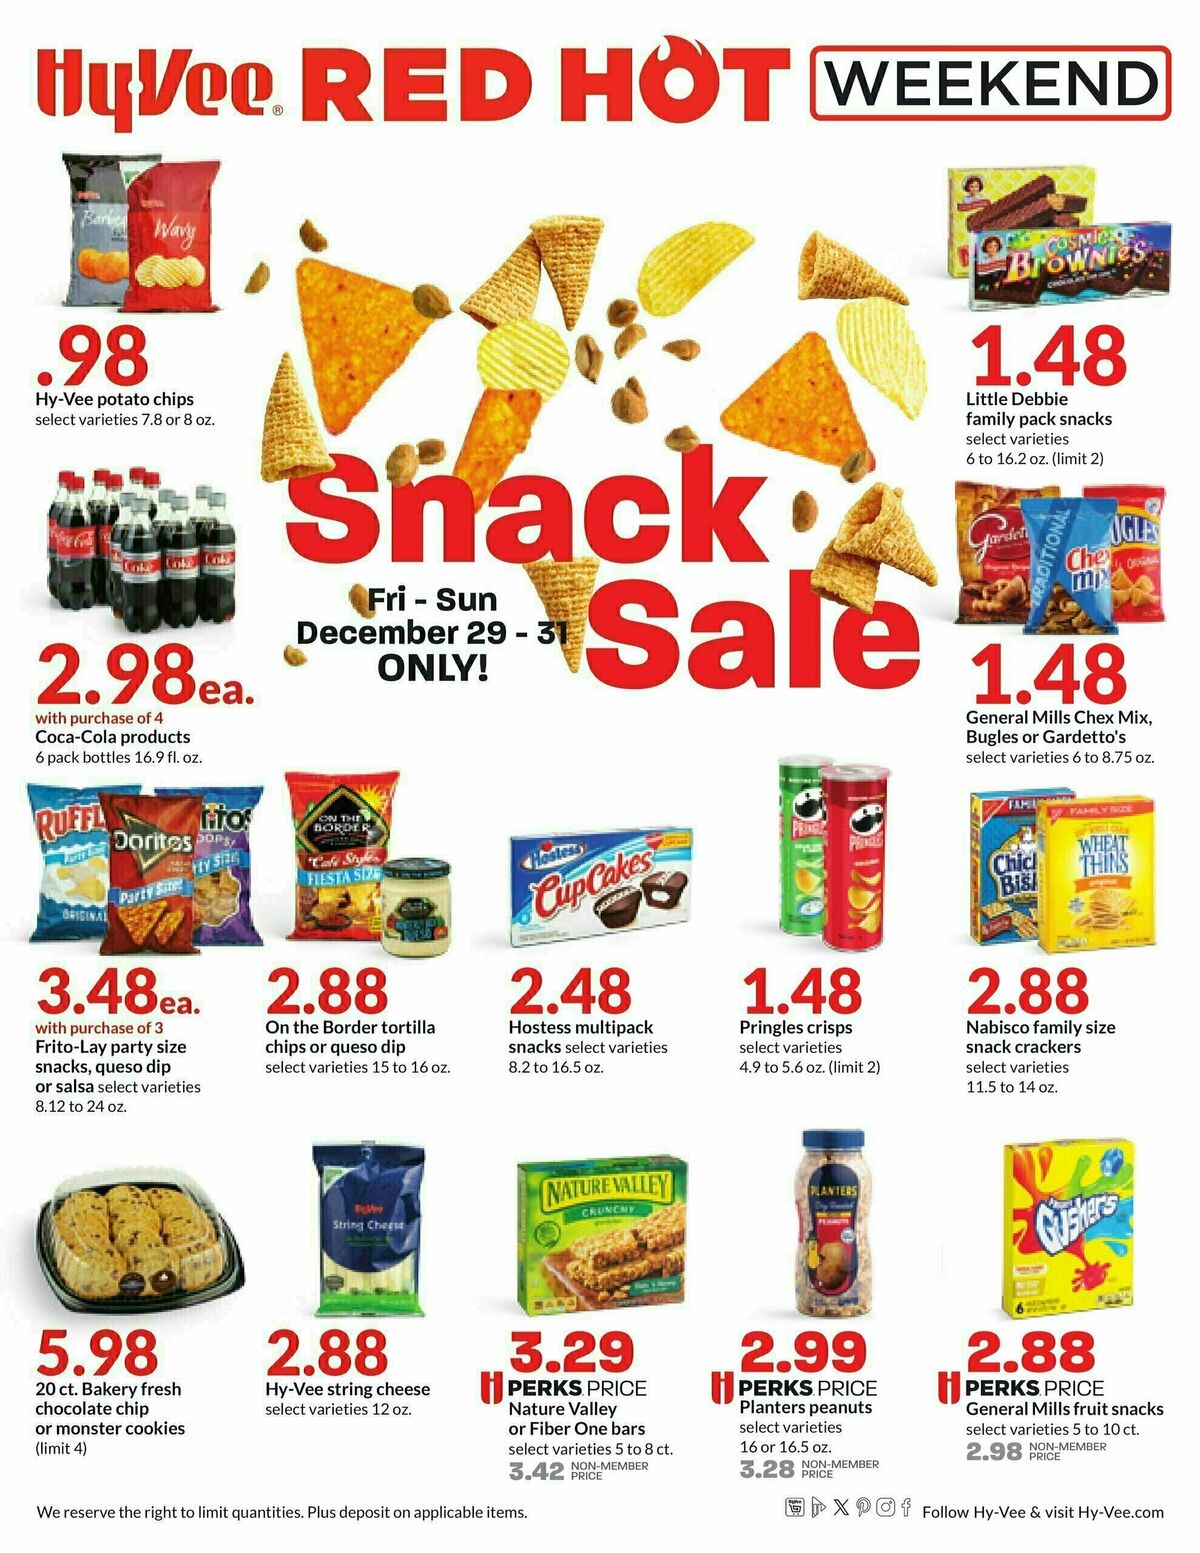 HyVee Red Hot Weekend Deals & Ads from December 29